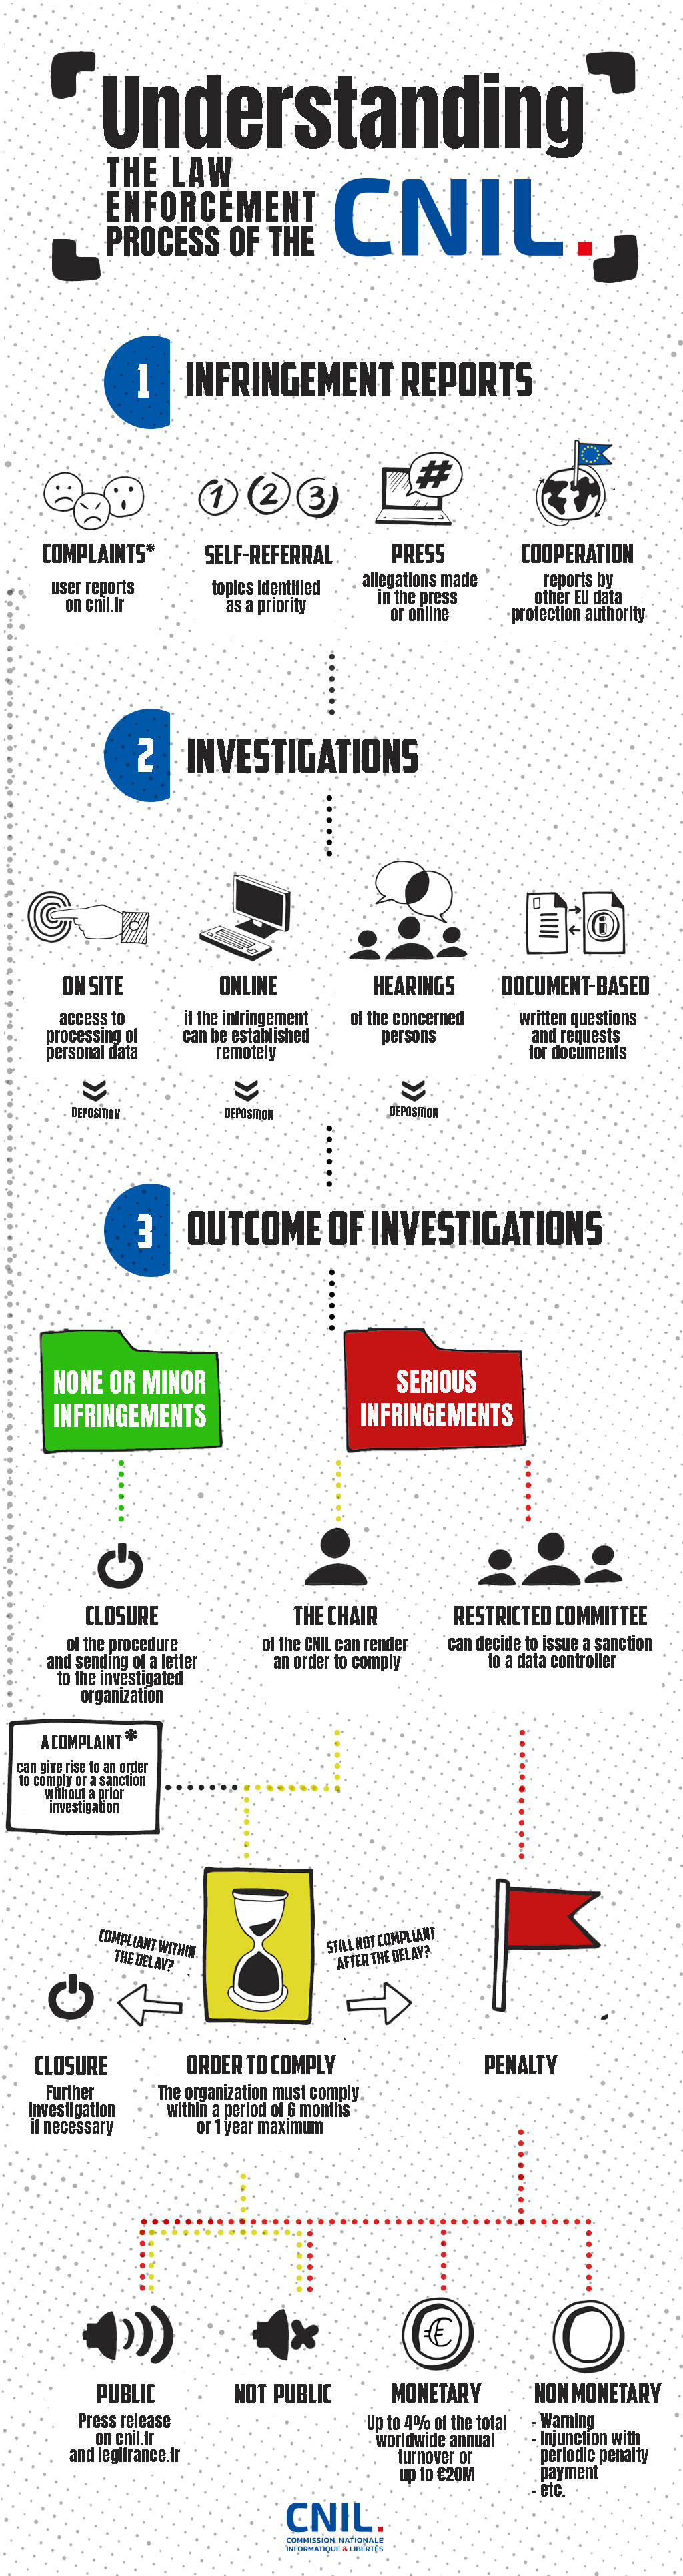 The law enforcement process of the CNIL - Image